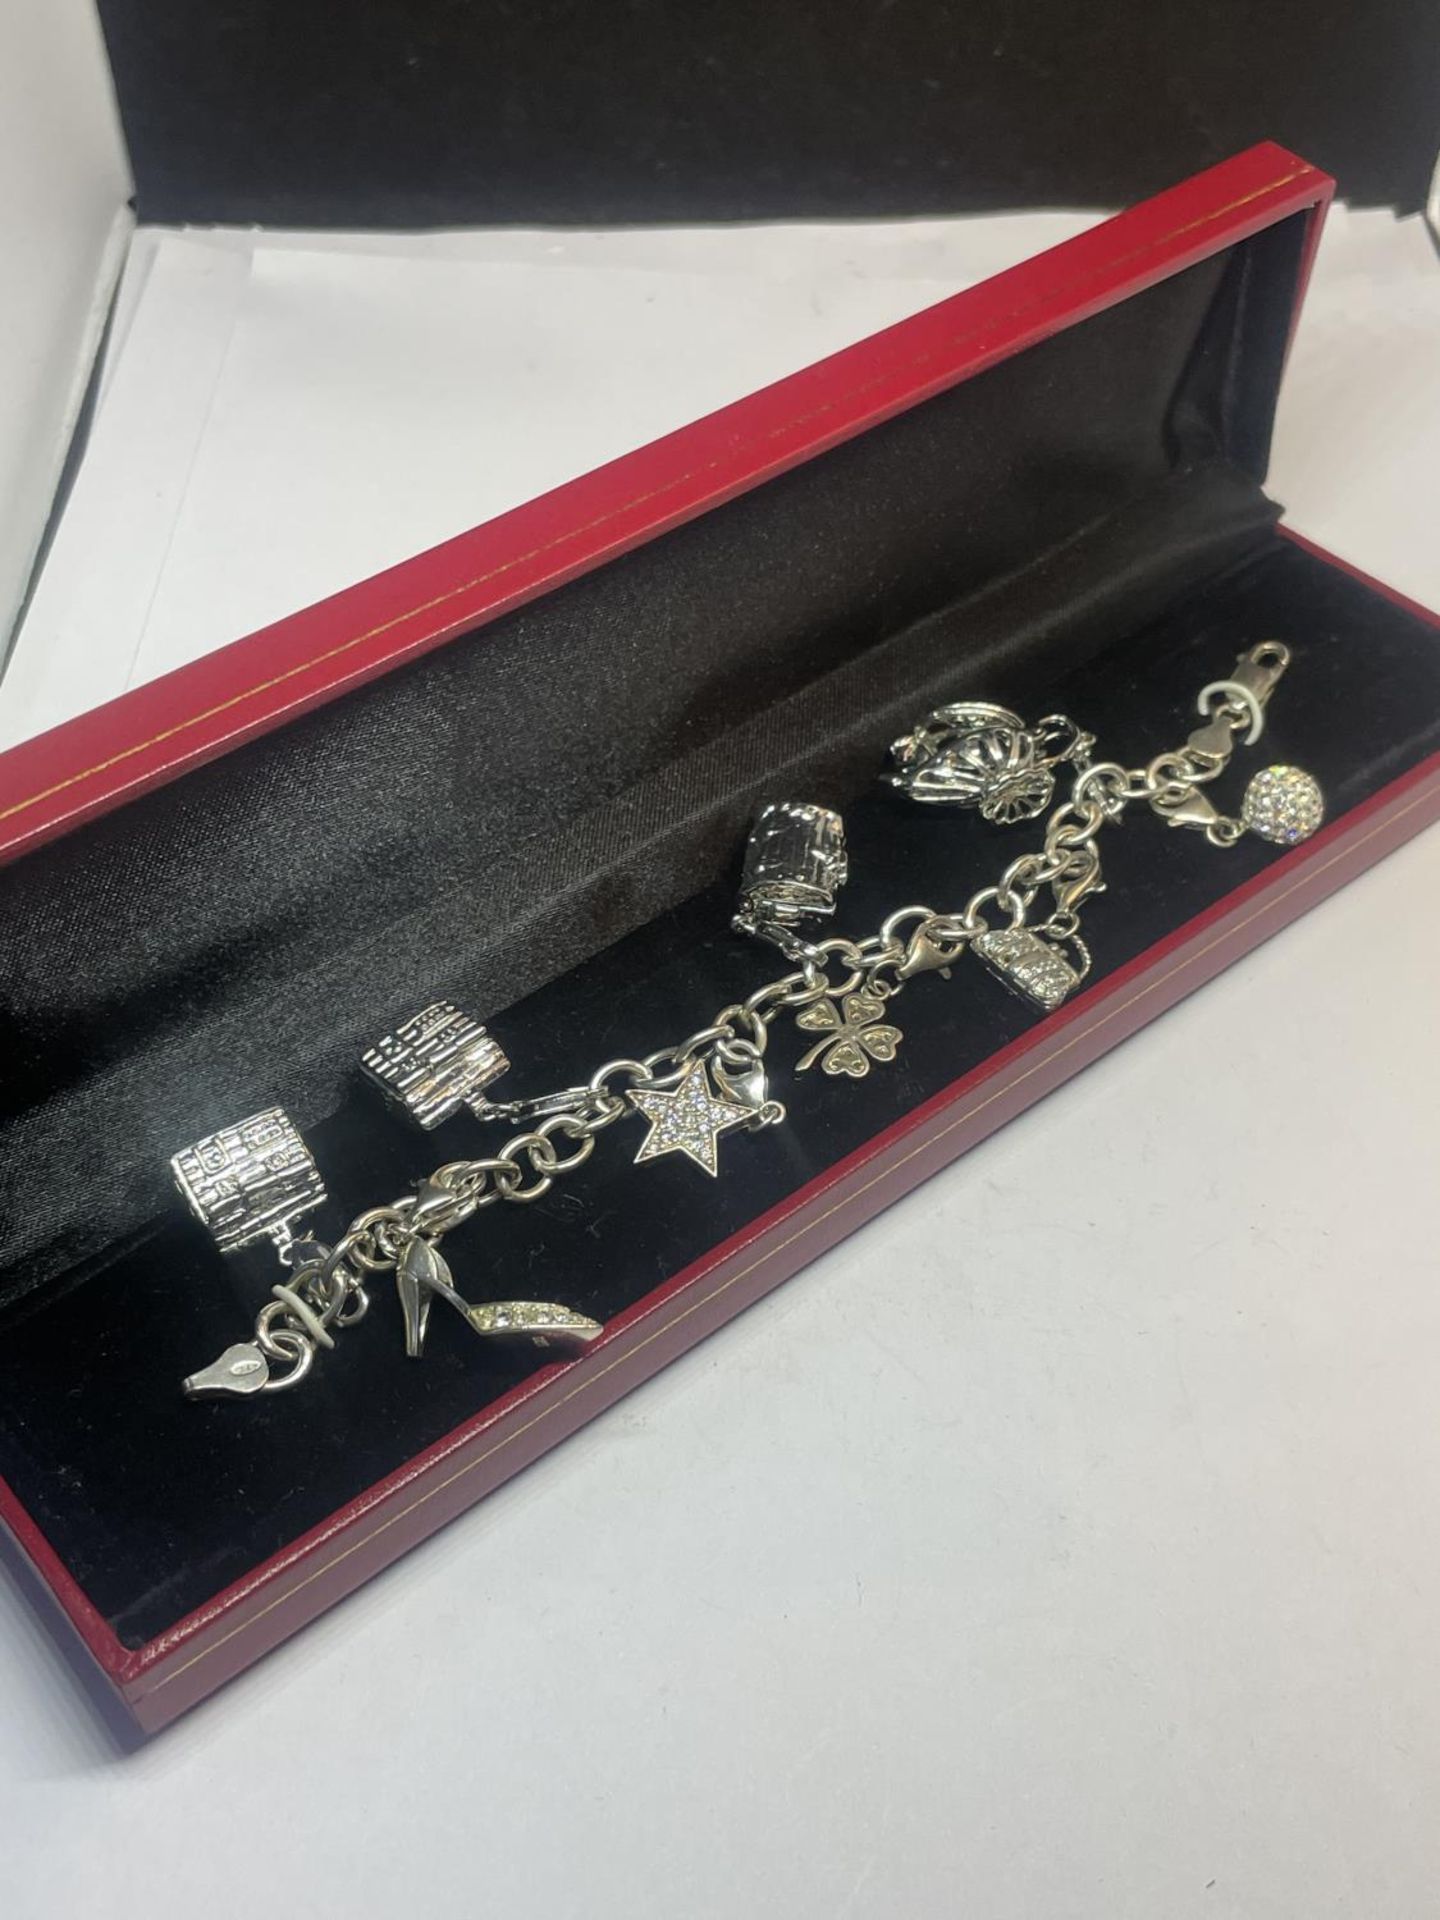 A SILVER CHARM BRACELET WITH NINE CHARMS IN A PRESENTATION BOX